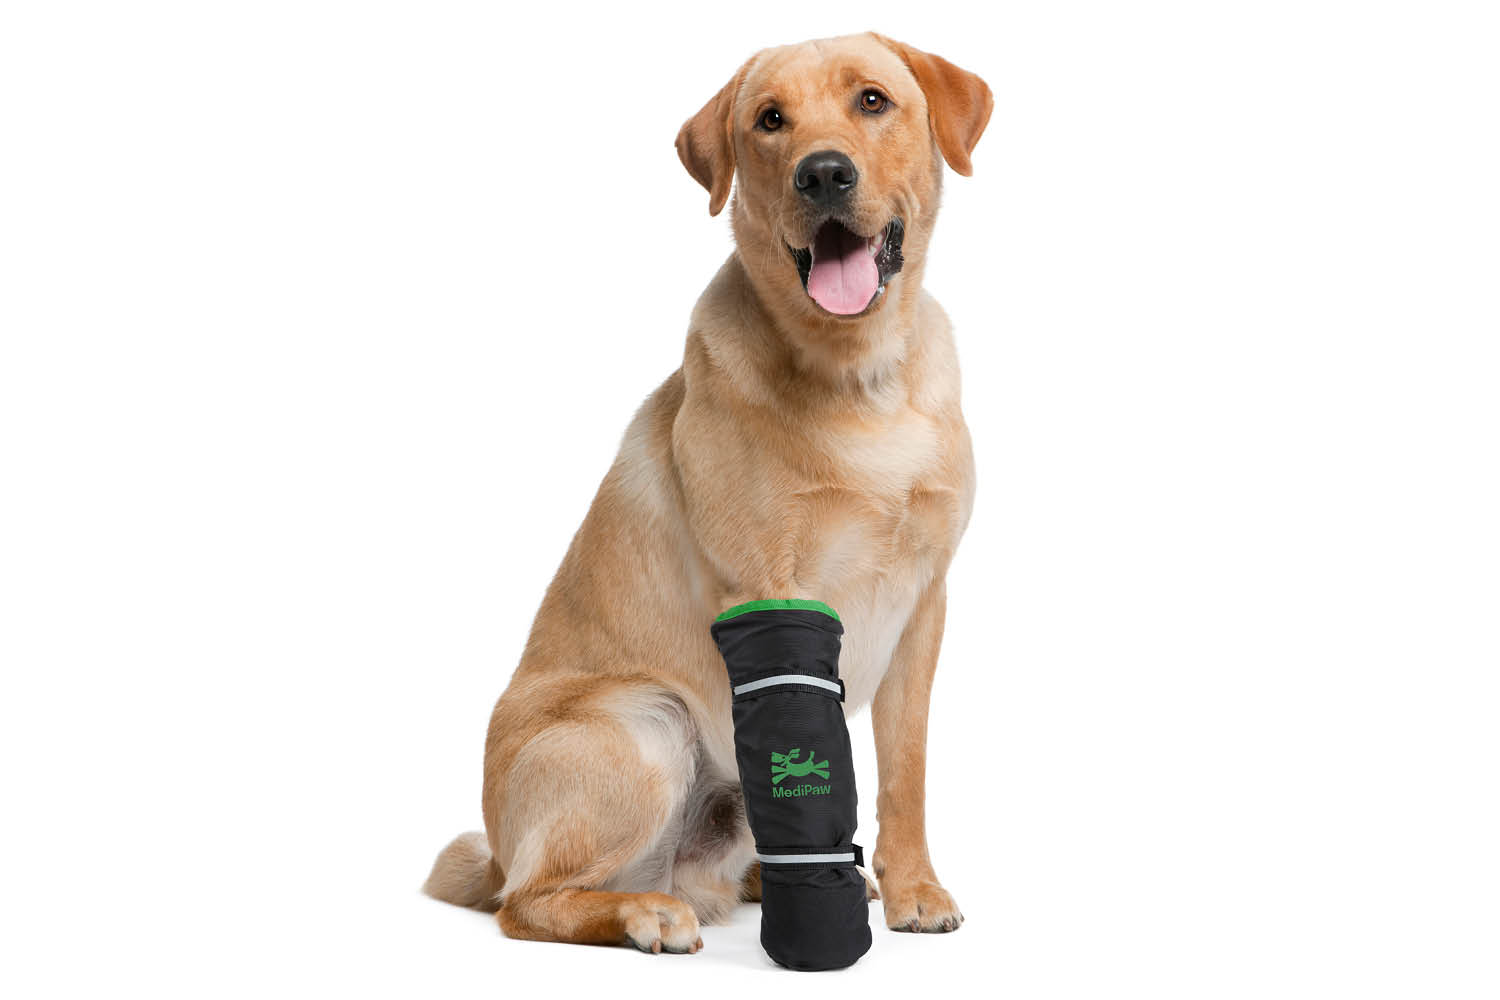 A dog is sitting on a white background wearing a knee brace and Your Whole Dog's MediPaw: Healing Slim Boots.